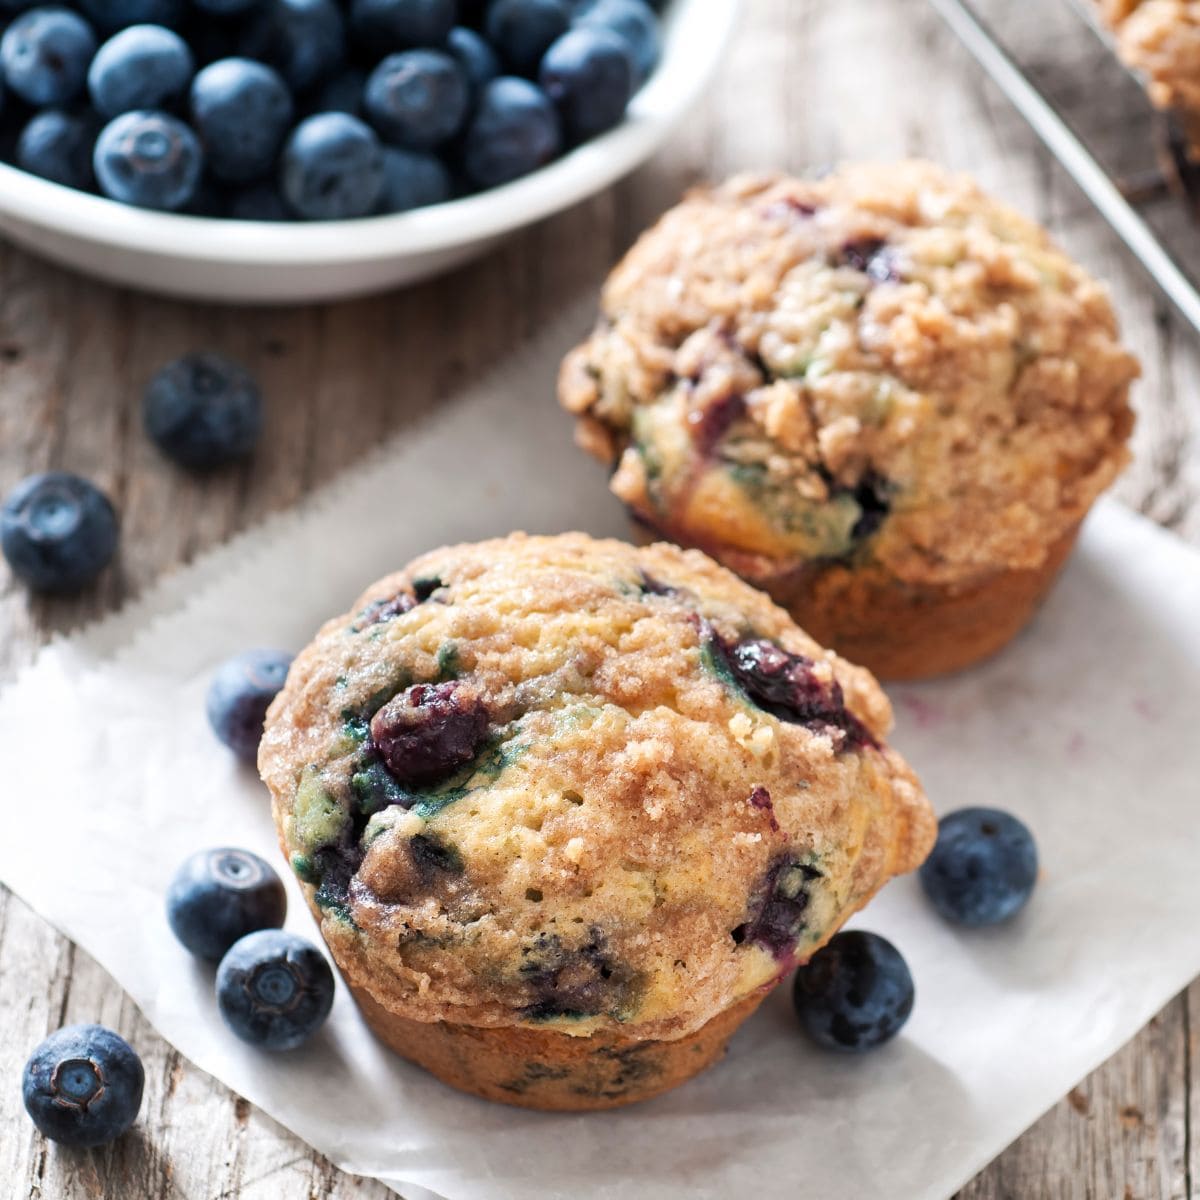 two blueberry muffins on a sheet of parchment with a bowl of fresh berries behind.